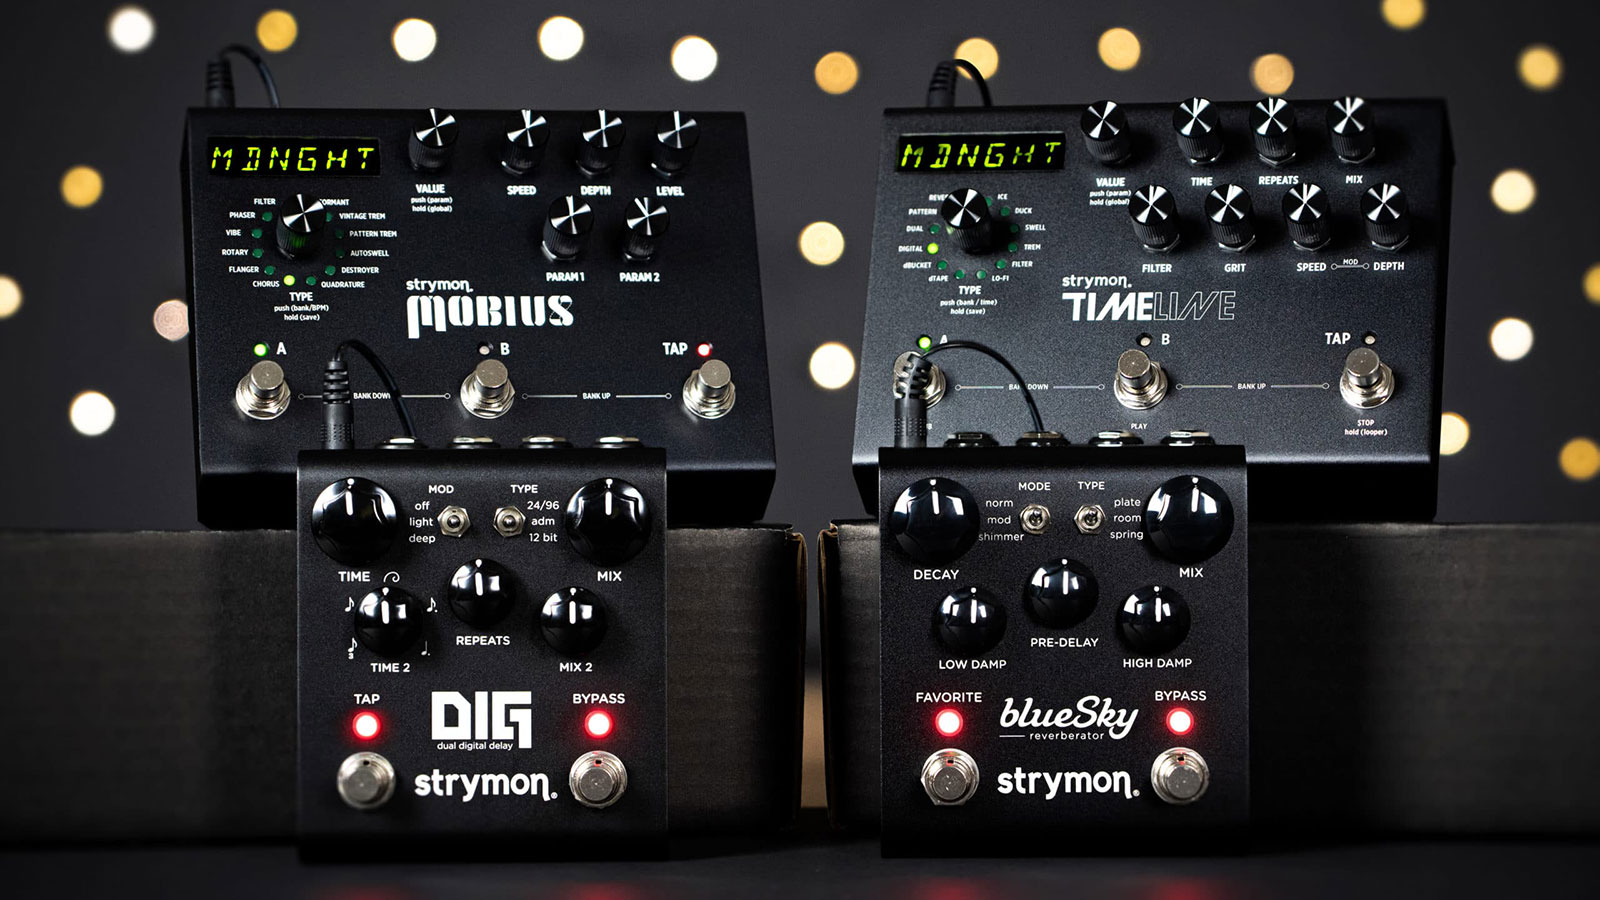 Back in black: Strymon offers Midnight Edition finish on its